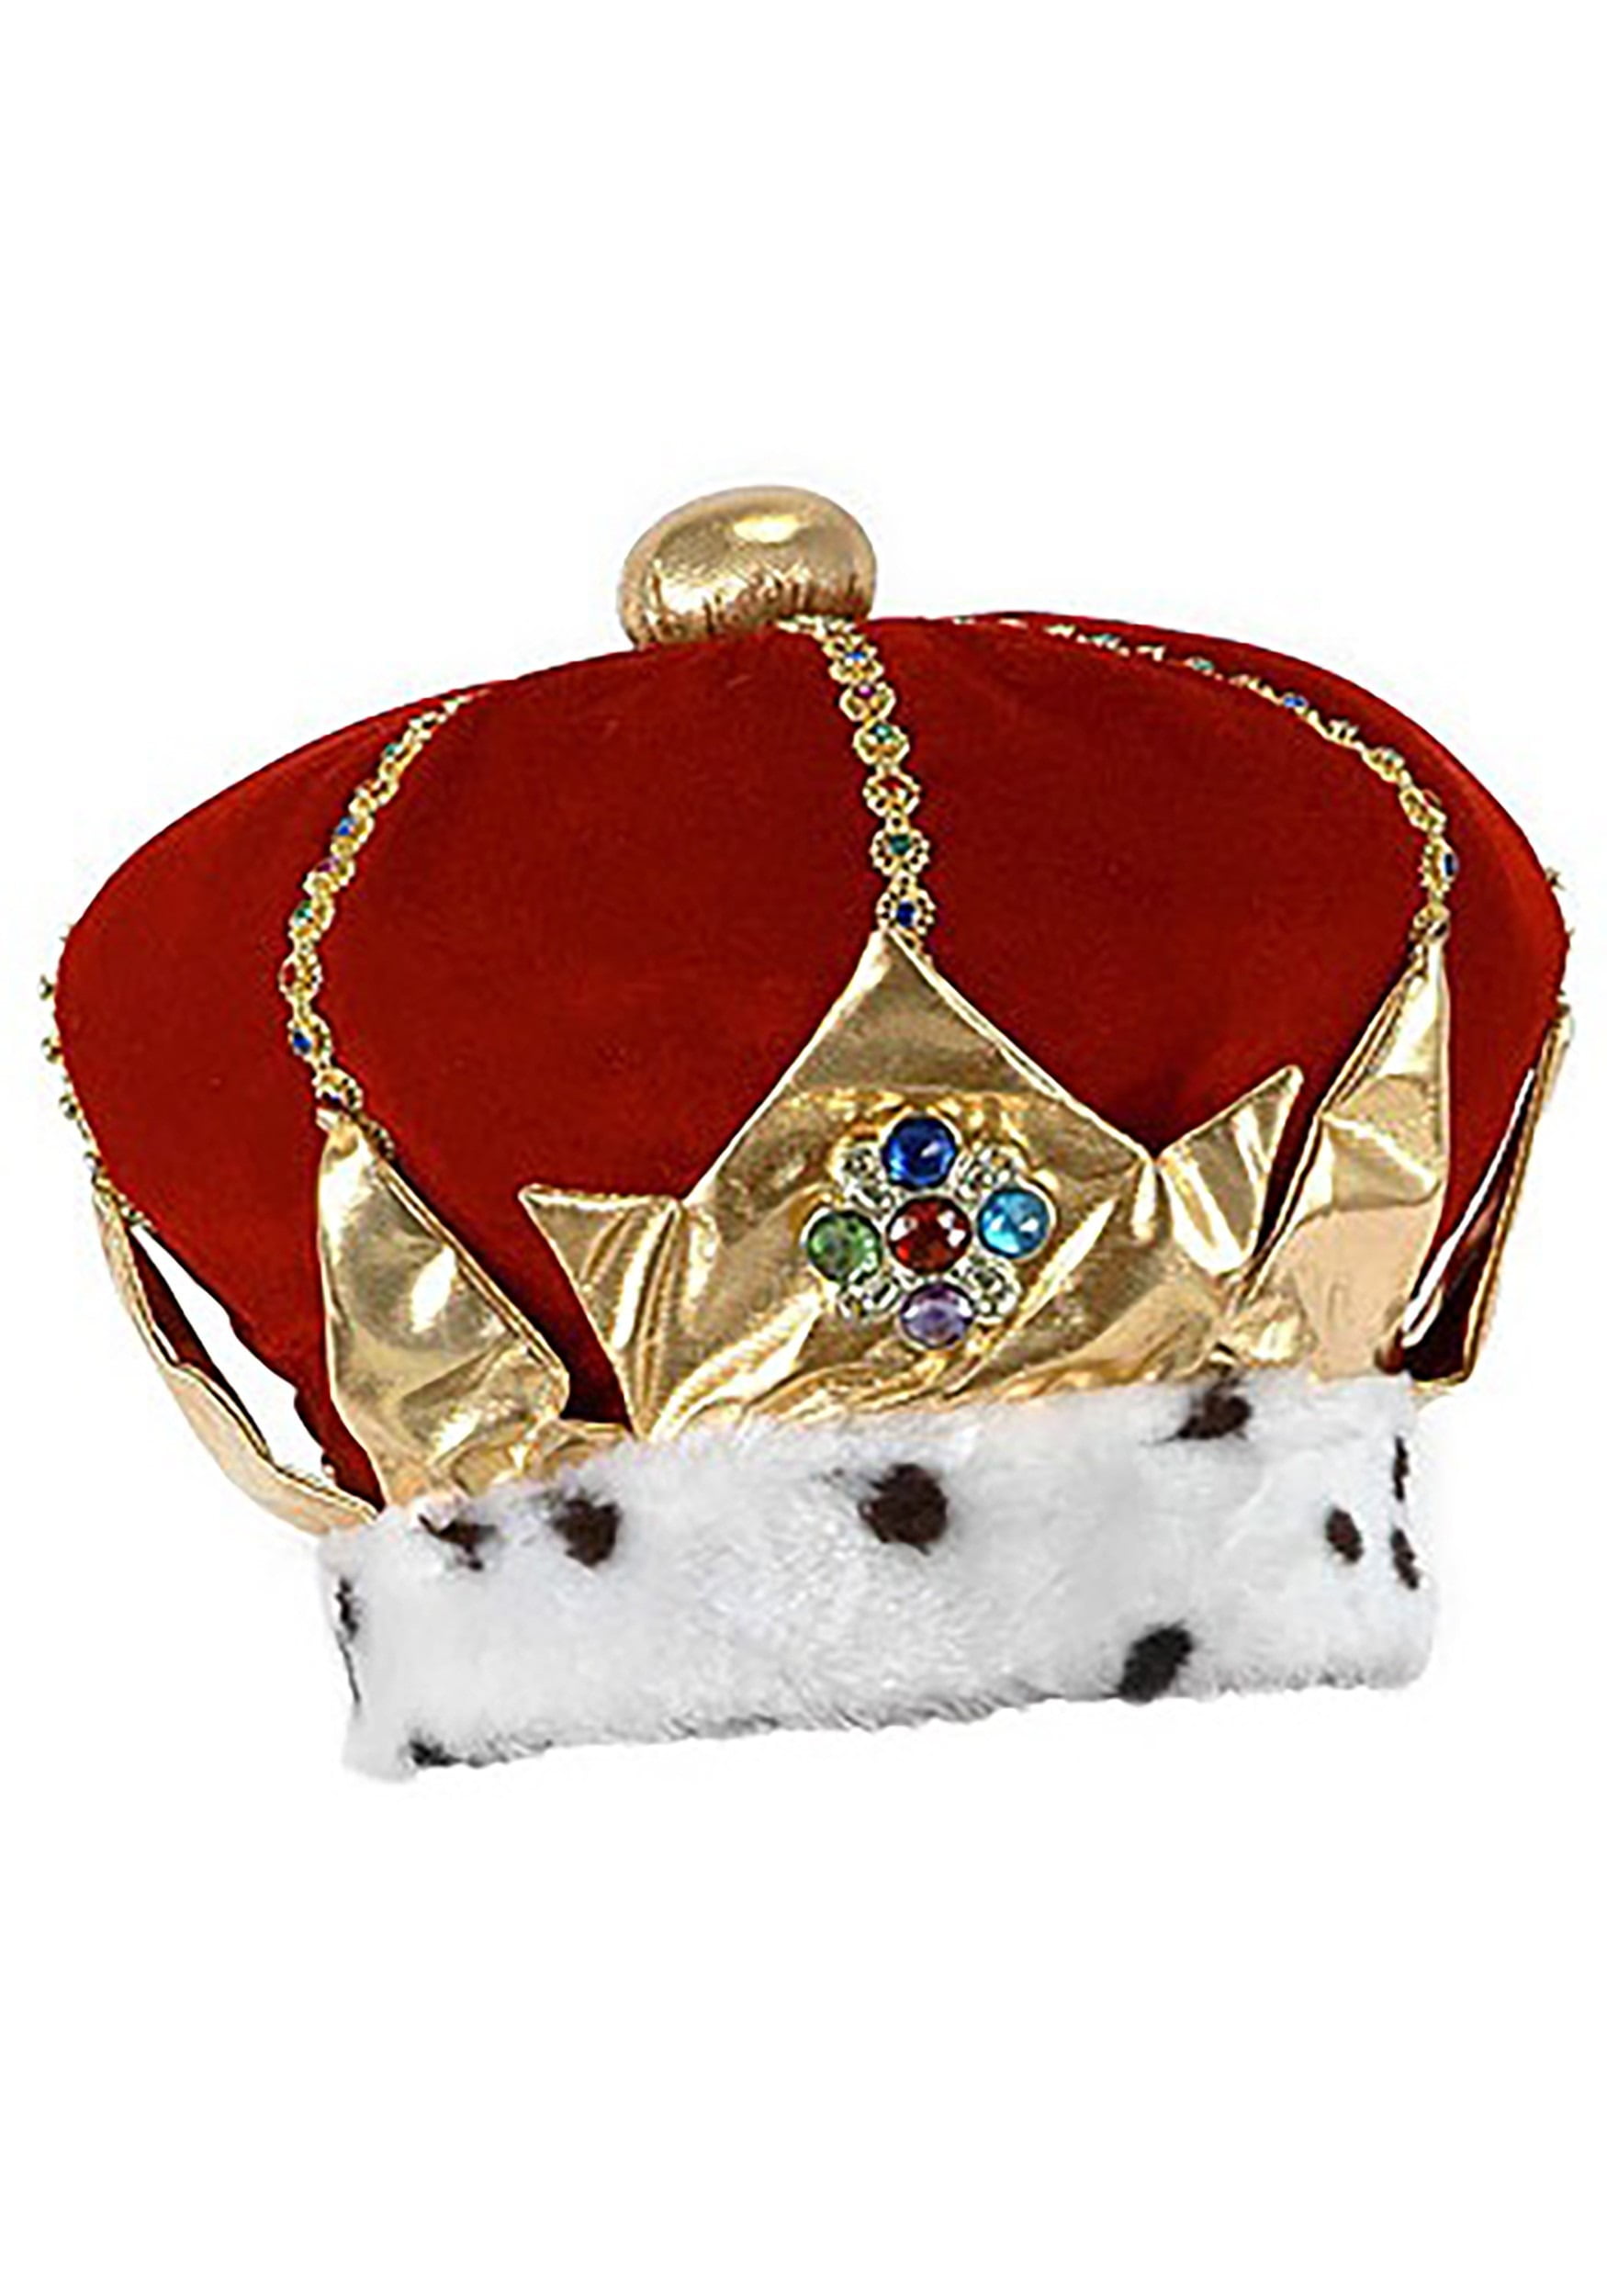 Royal Gold Crown Adults Fancy Dress Mens Ladies King & Queen Accessory 